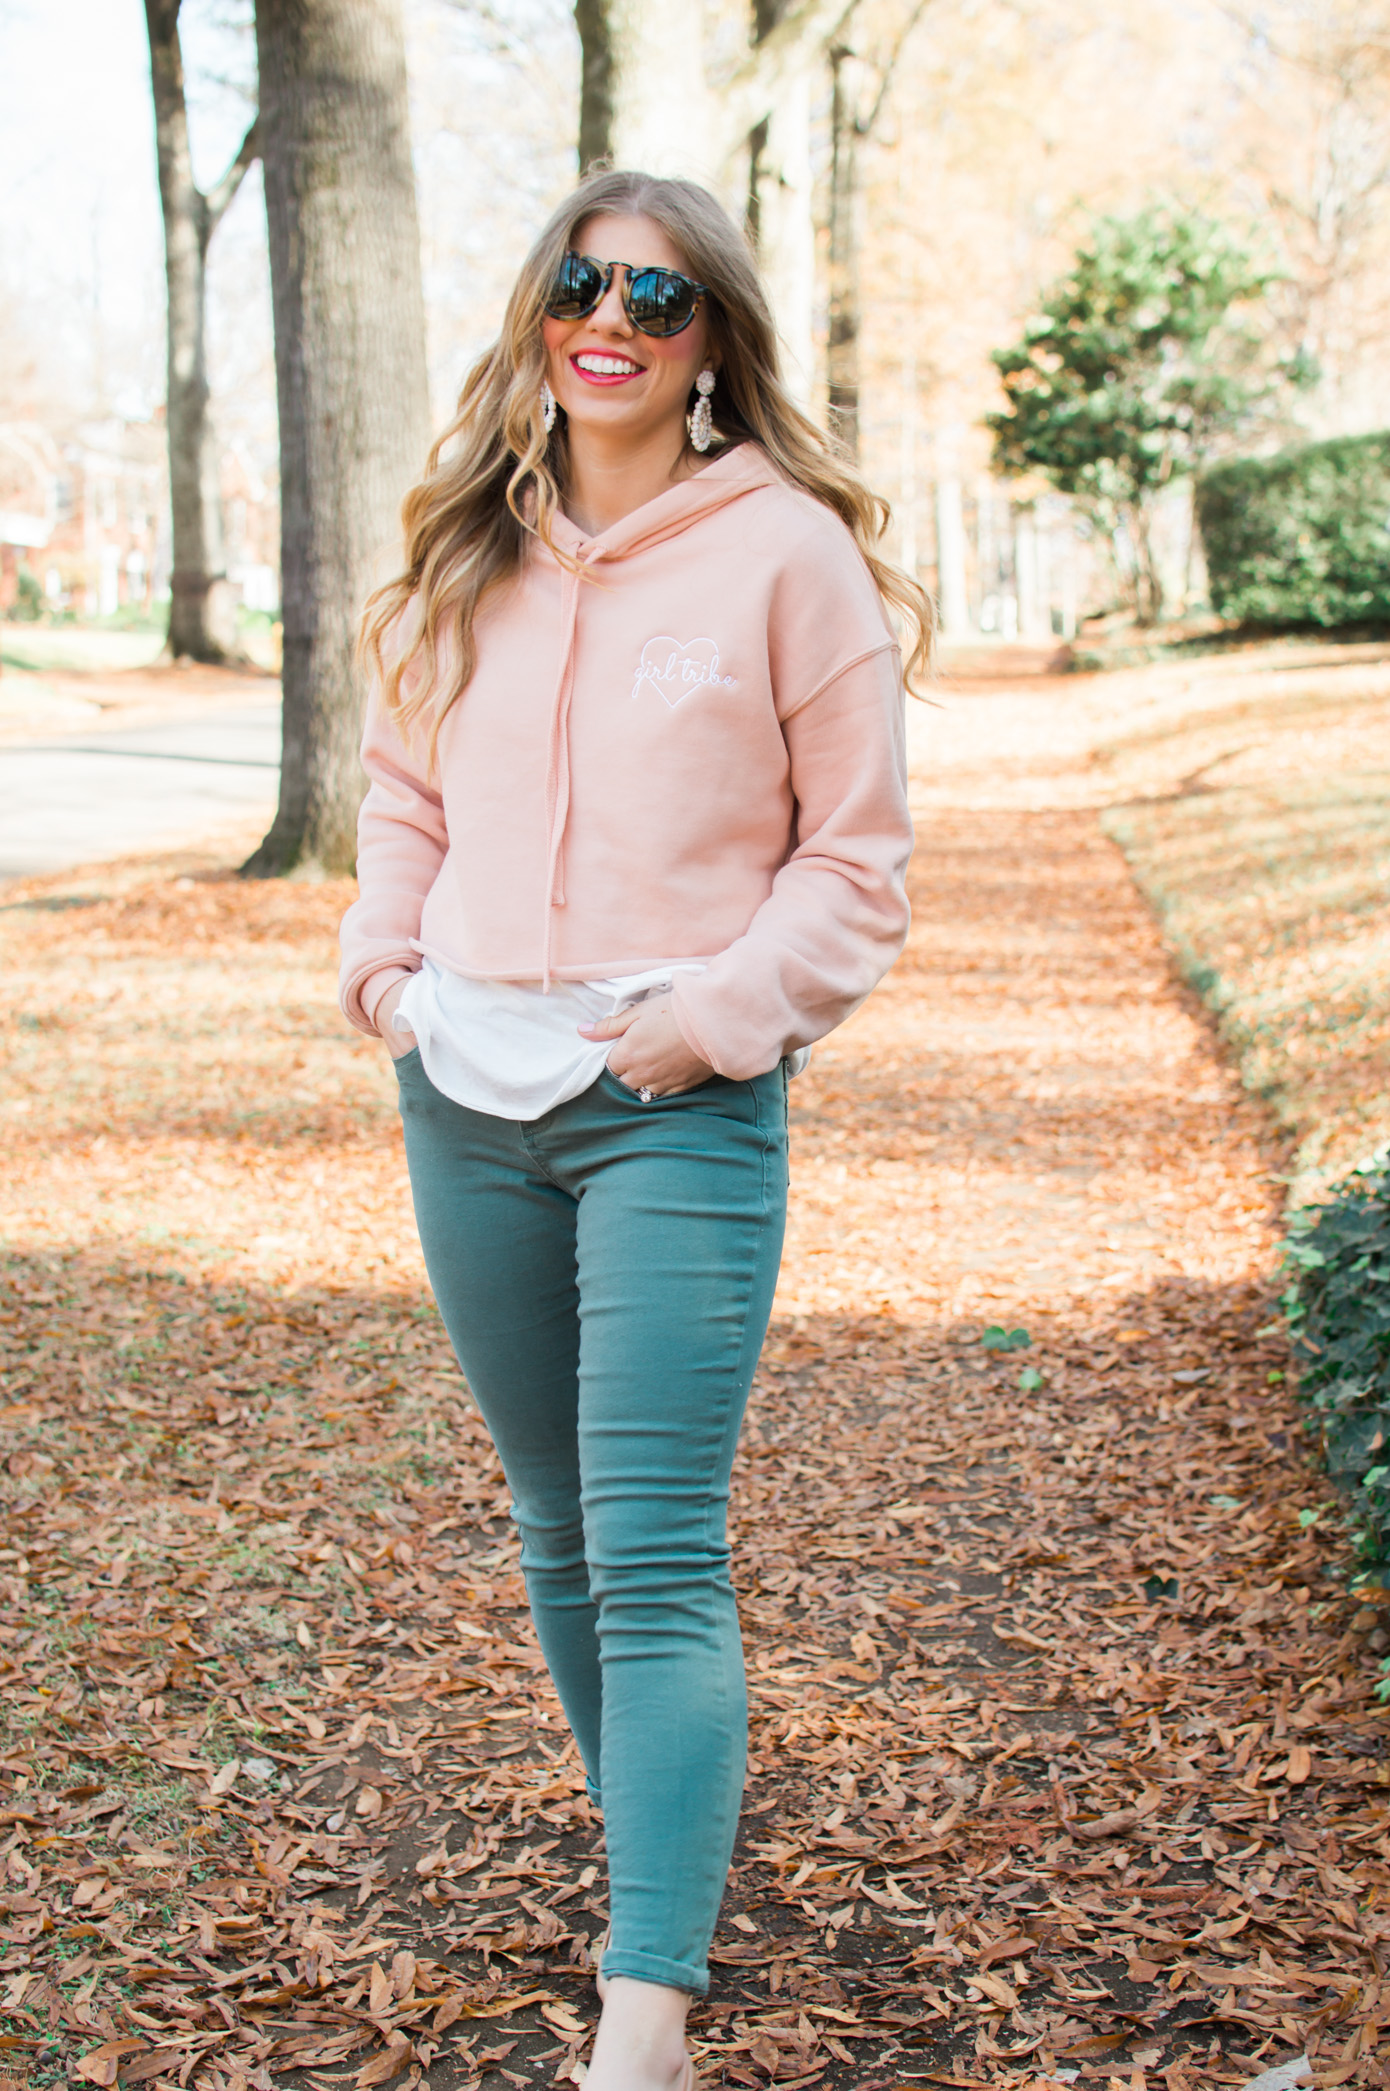 Louella Reese Shop Local | Girl Tribe Cropped Sweatshirt | Louella Reese Life & Style Blog